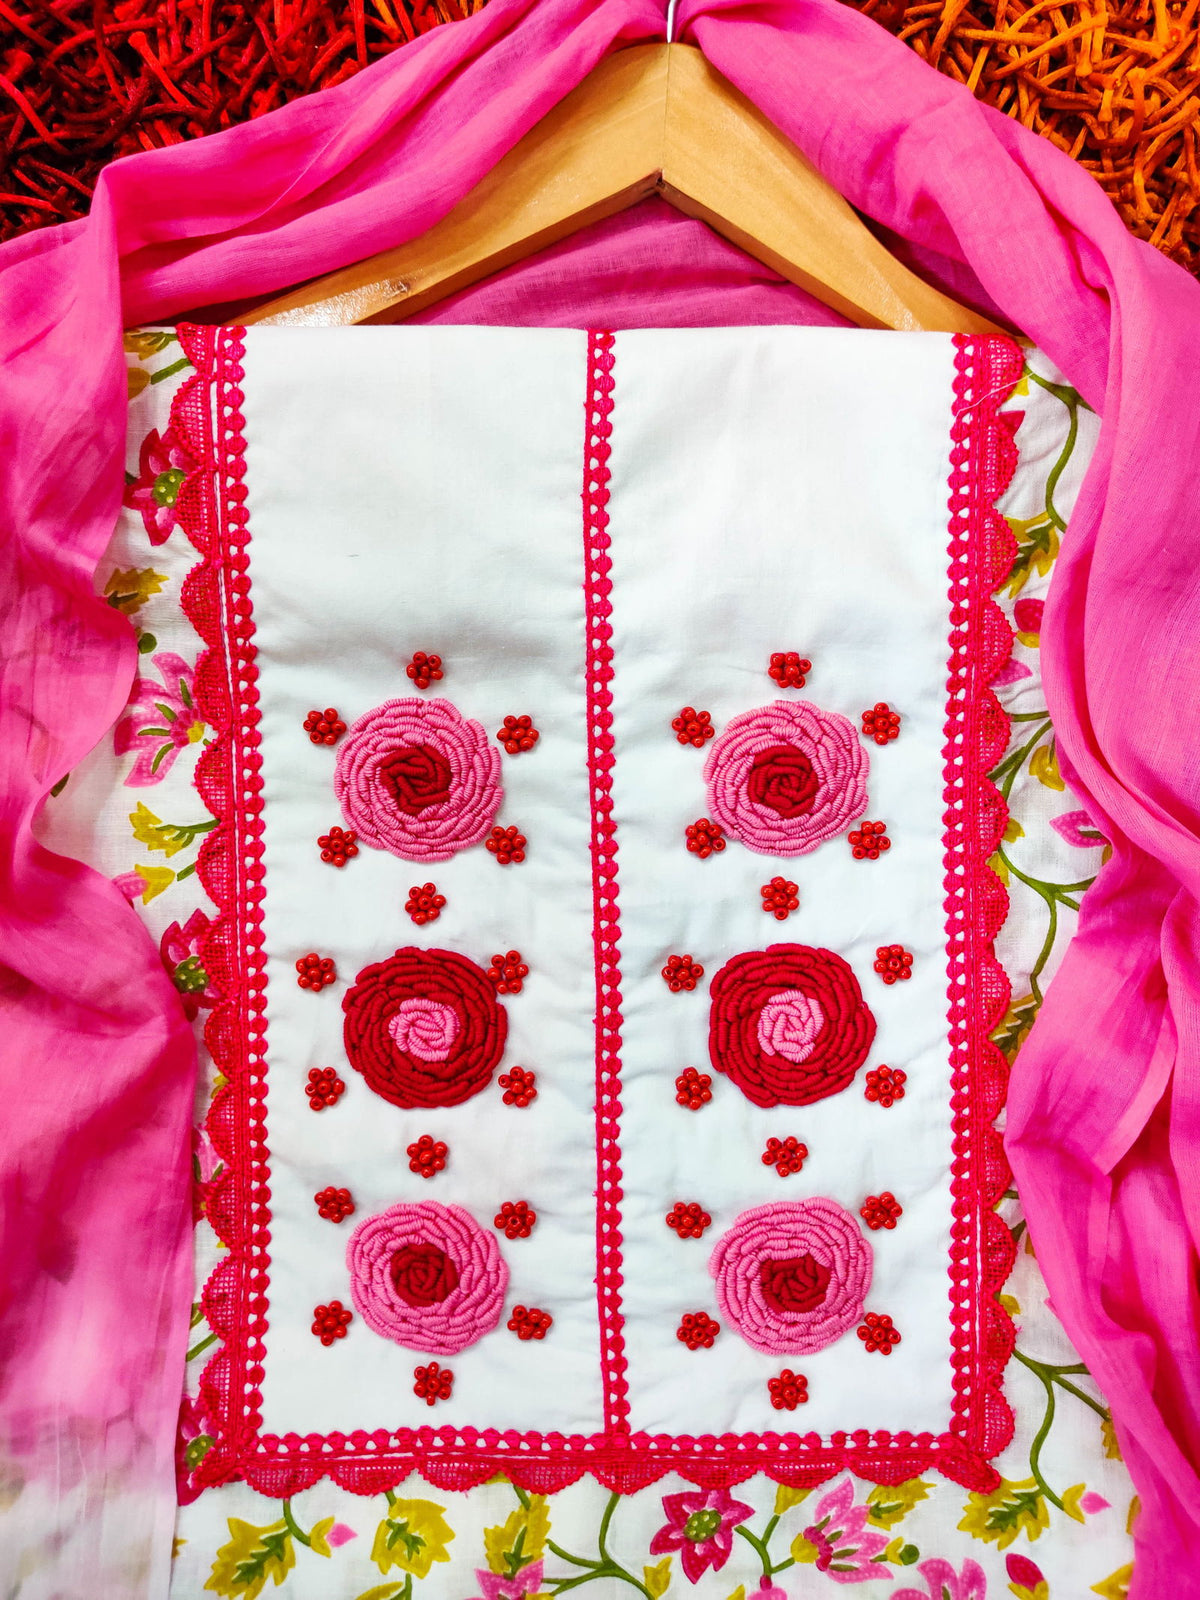 Floral Cotton Hand-Embroidered Patch Unstitched Dress Material Kurta Set with Magenta Lace Accents - Mom & You Clothing